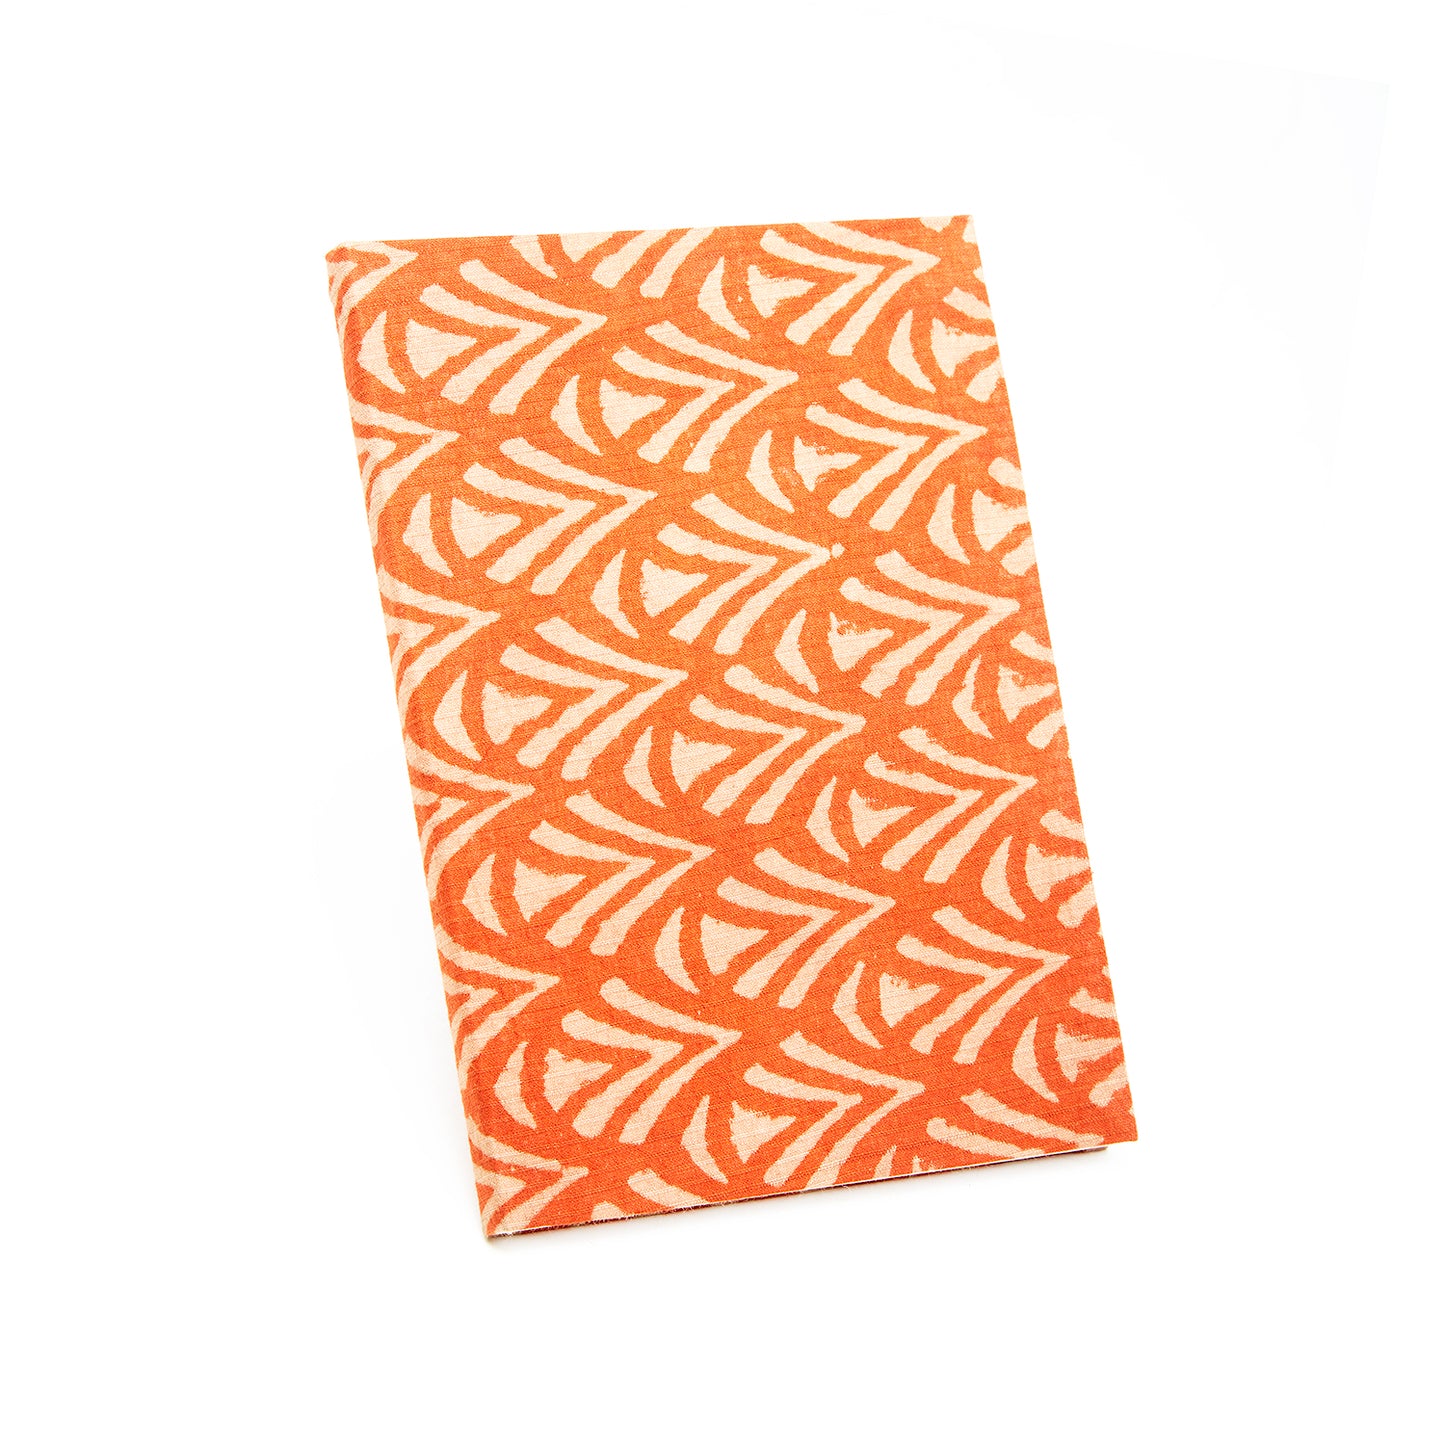 Fire Orange Color with Ethnic Design - Regular Size Diary